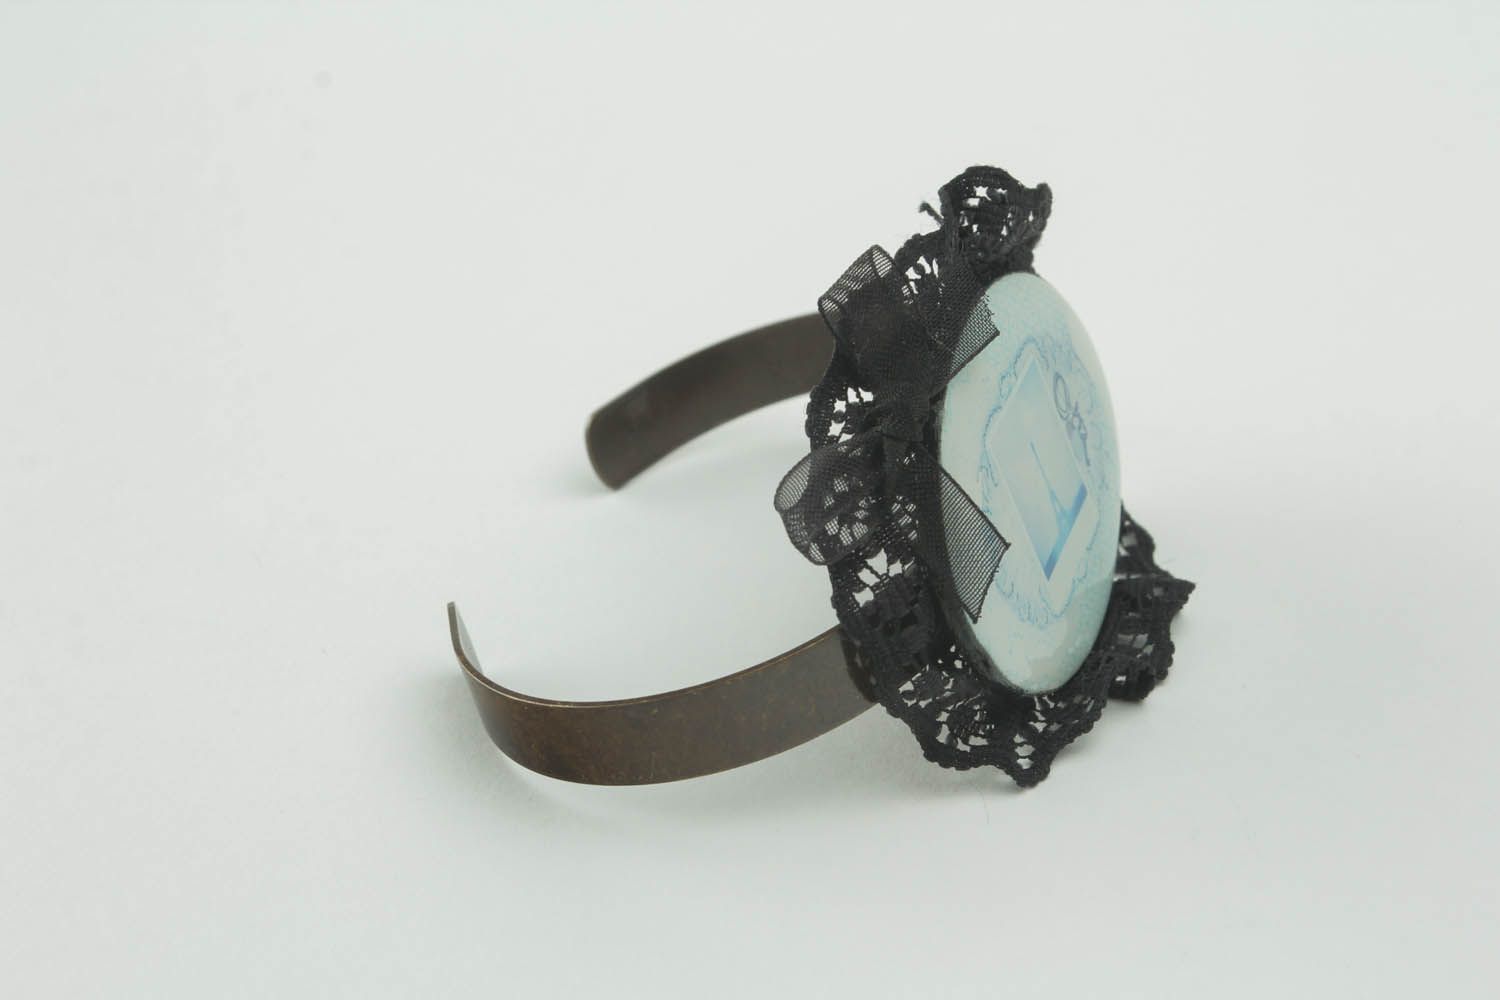 Bracelet made of satin and lace photo 2